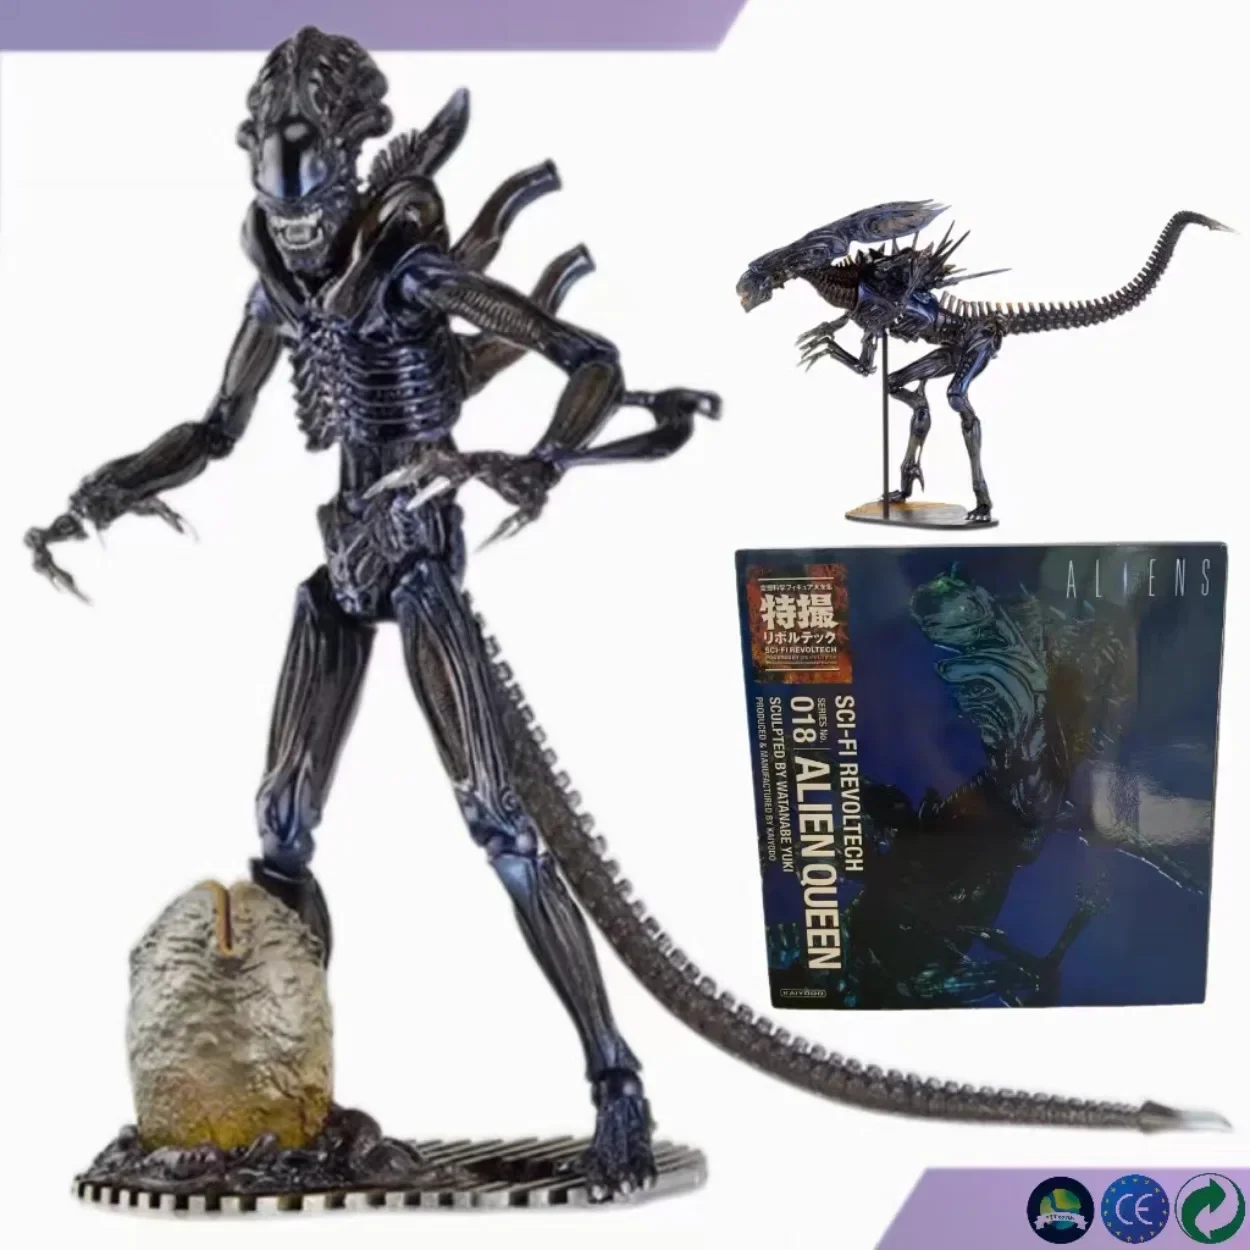 

Yamaguchi 016 018 Alien Action Figures Toys 15cm High Quality Alien Vs. Predator Statues Model Doll Collectible Ornaments Gifts